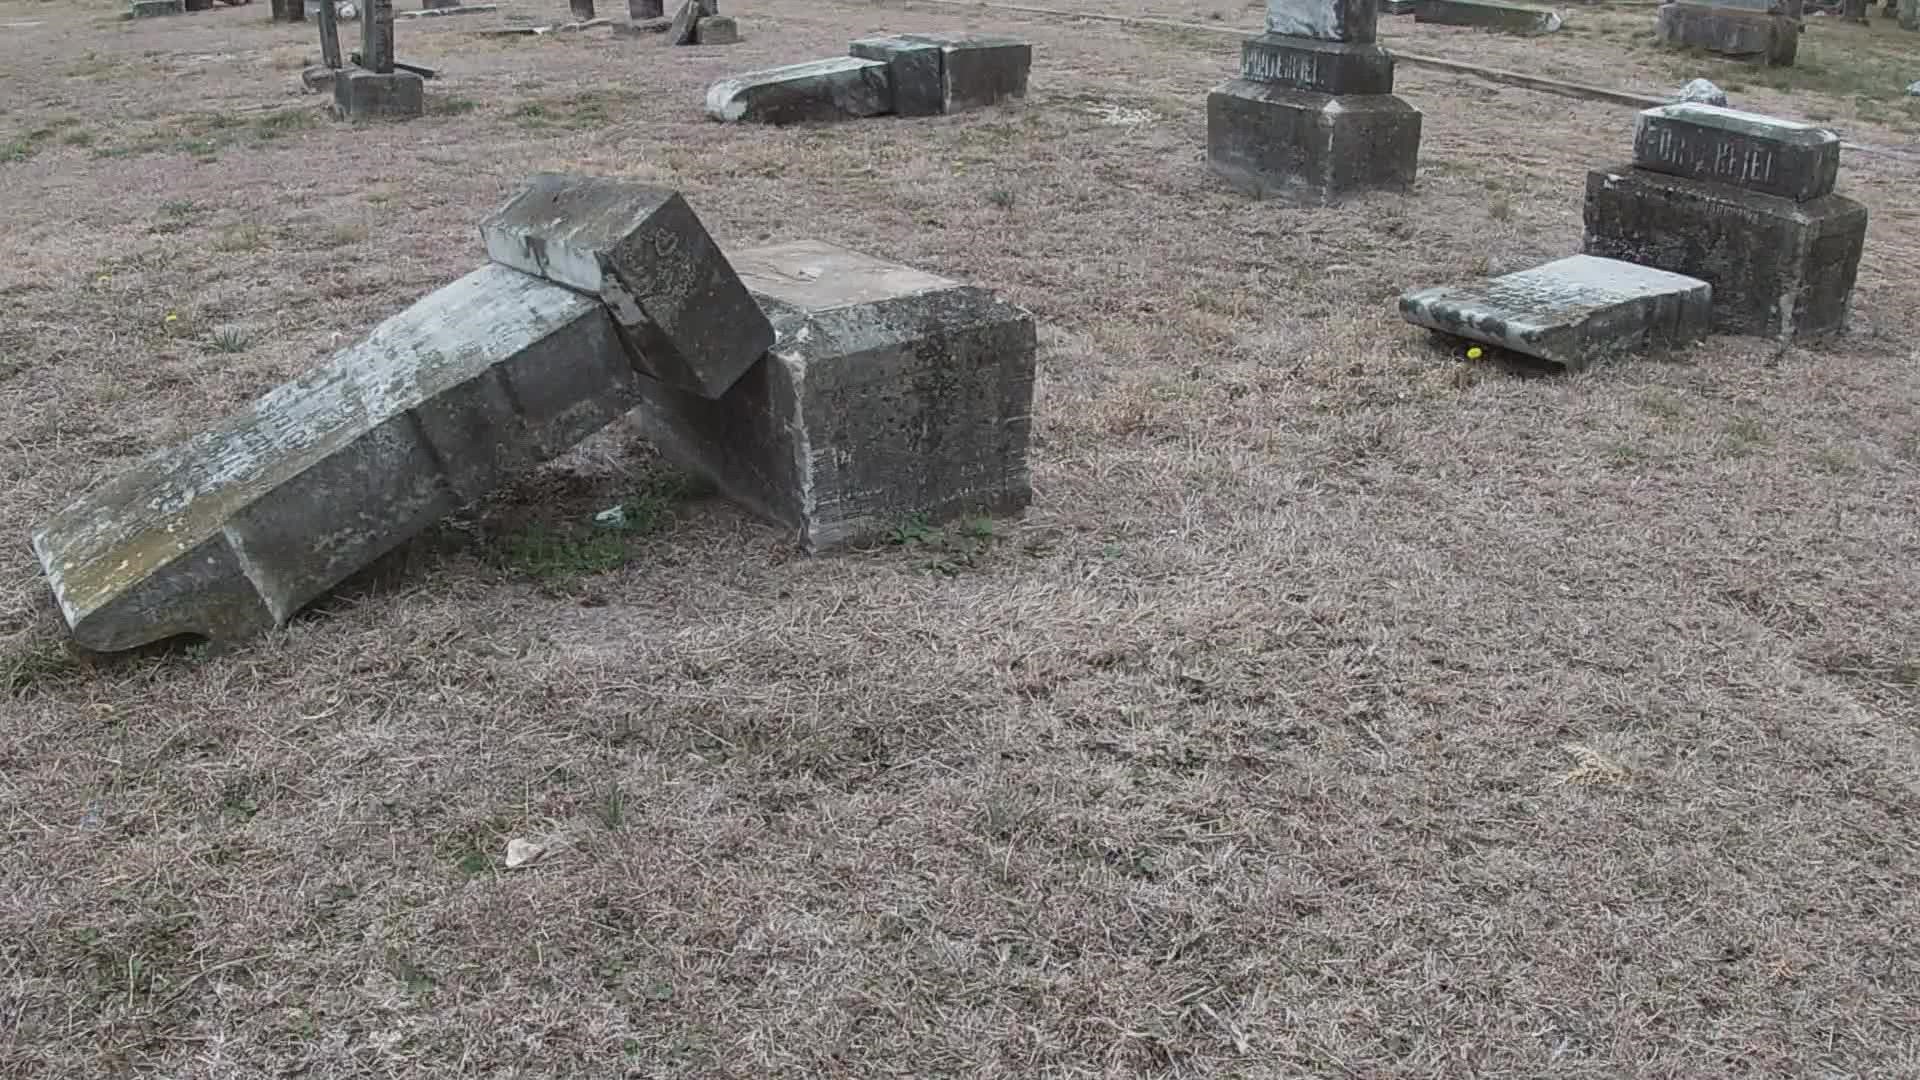 City officials say somewhere between Saturday afternoon and Monday morning, someone tipped over and damaged more than 275 headstones.